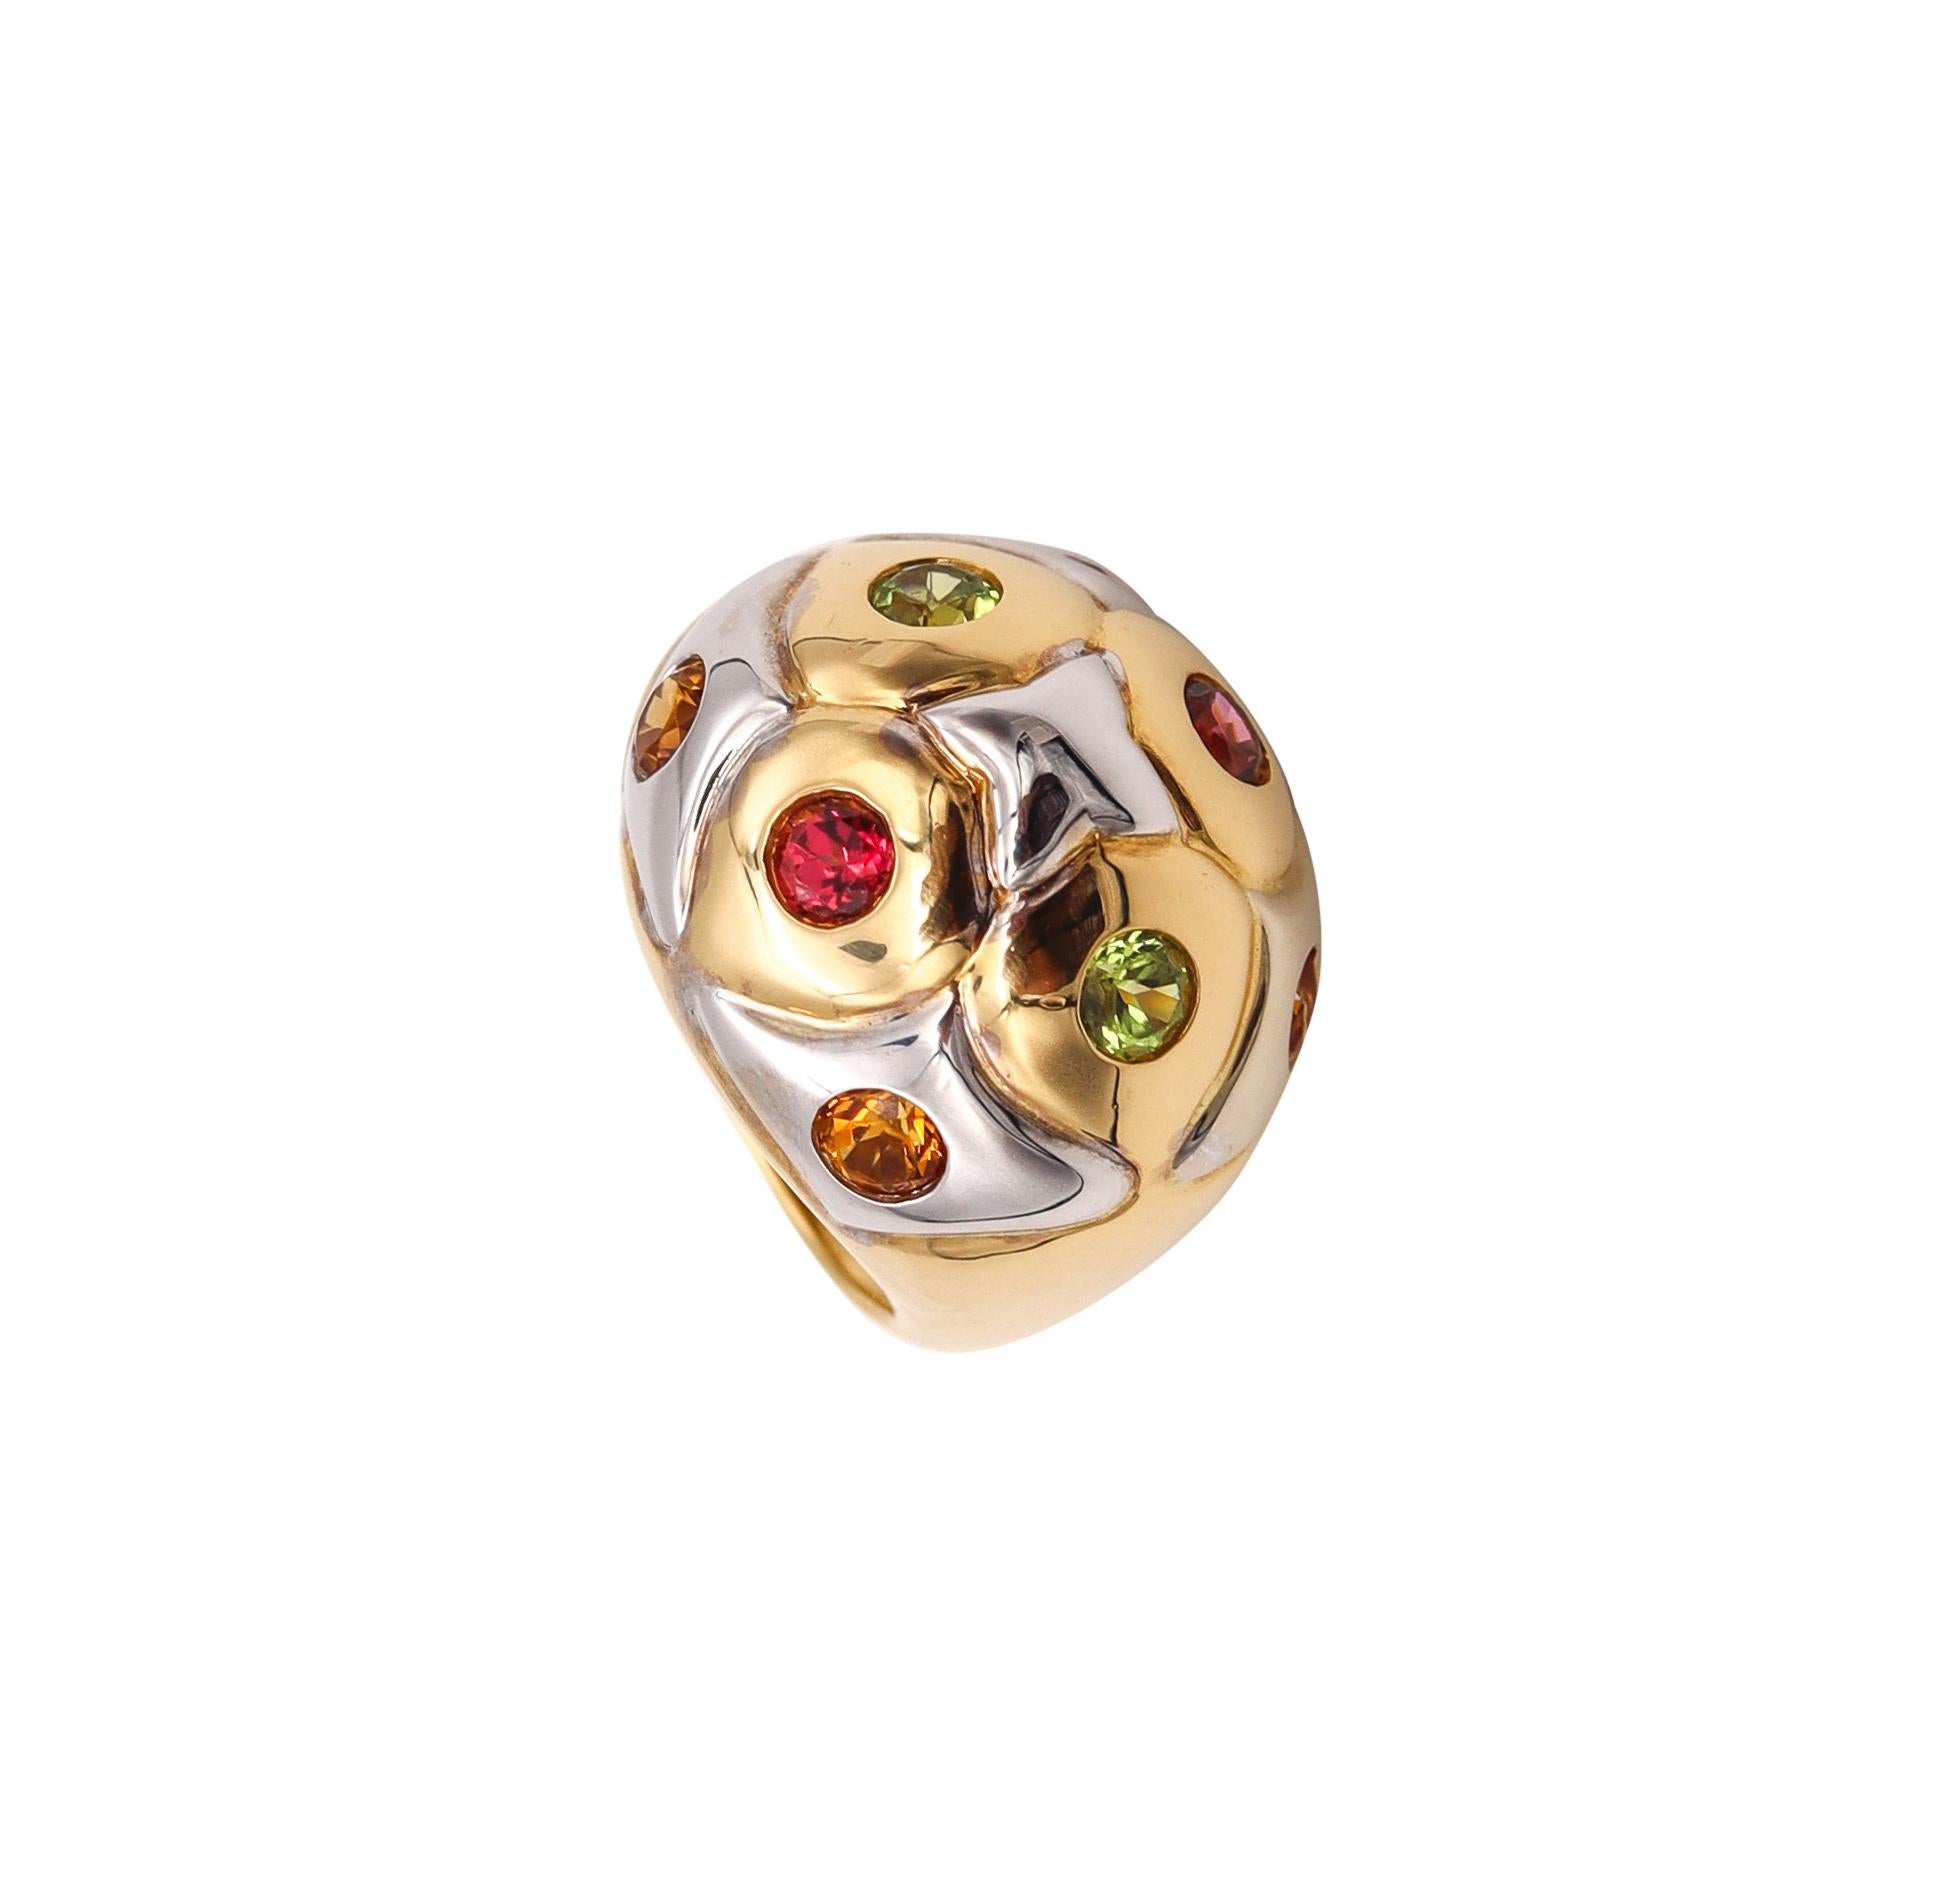 Cocktail Ring designed by Bvlgari.

A vintage piece, made in Italy by the house of Bvlgari. This bombe ring has been crafted in white and yellow gold of 18 karats, with high polished finish.

It is mounted, with 8 round brilliant cut natural